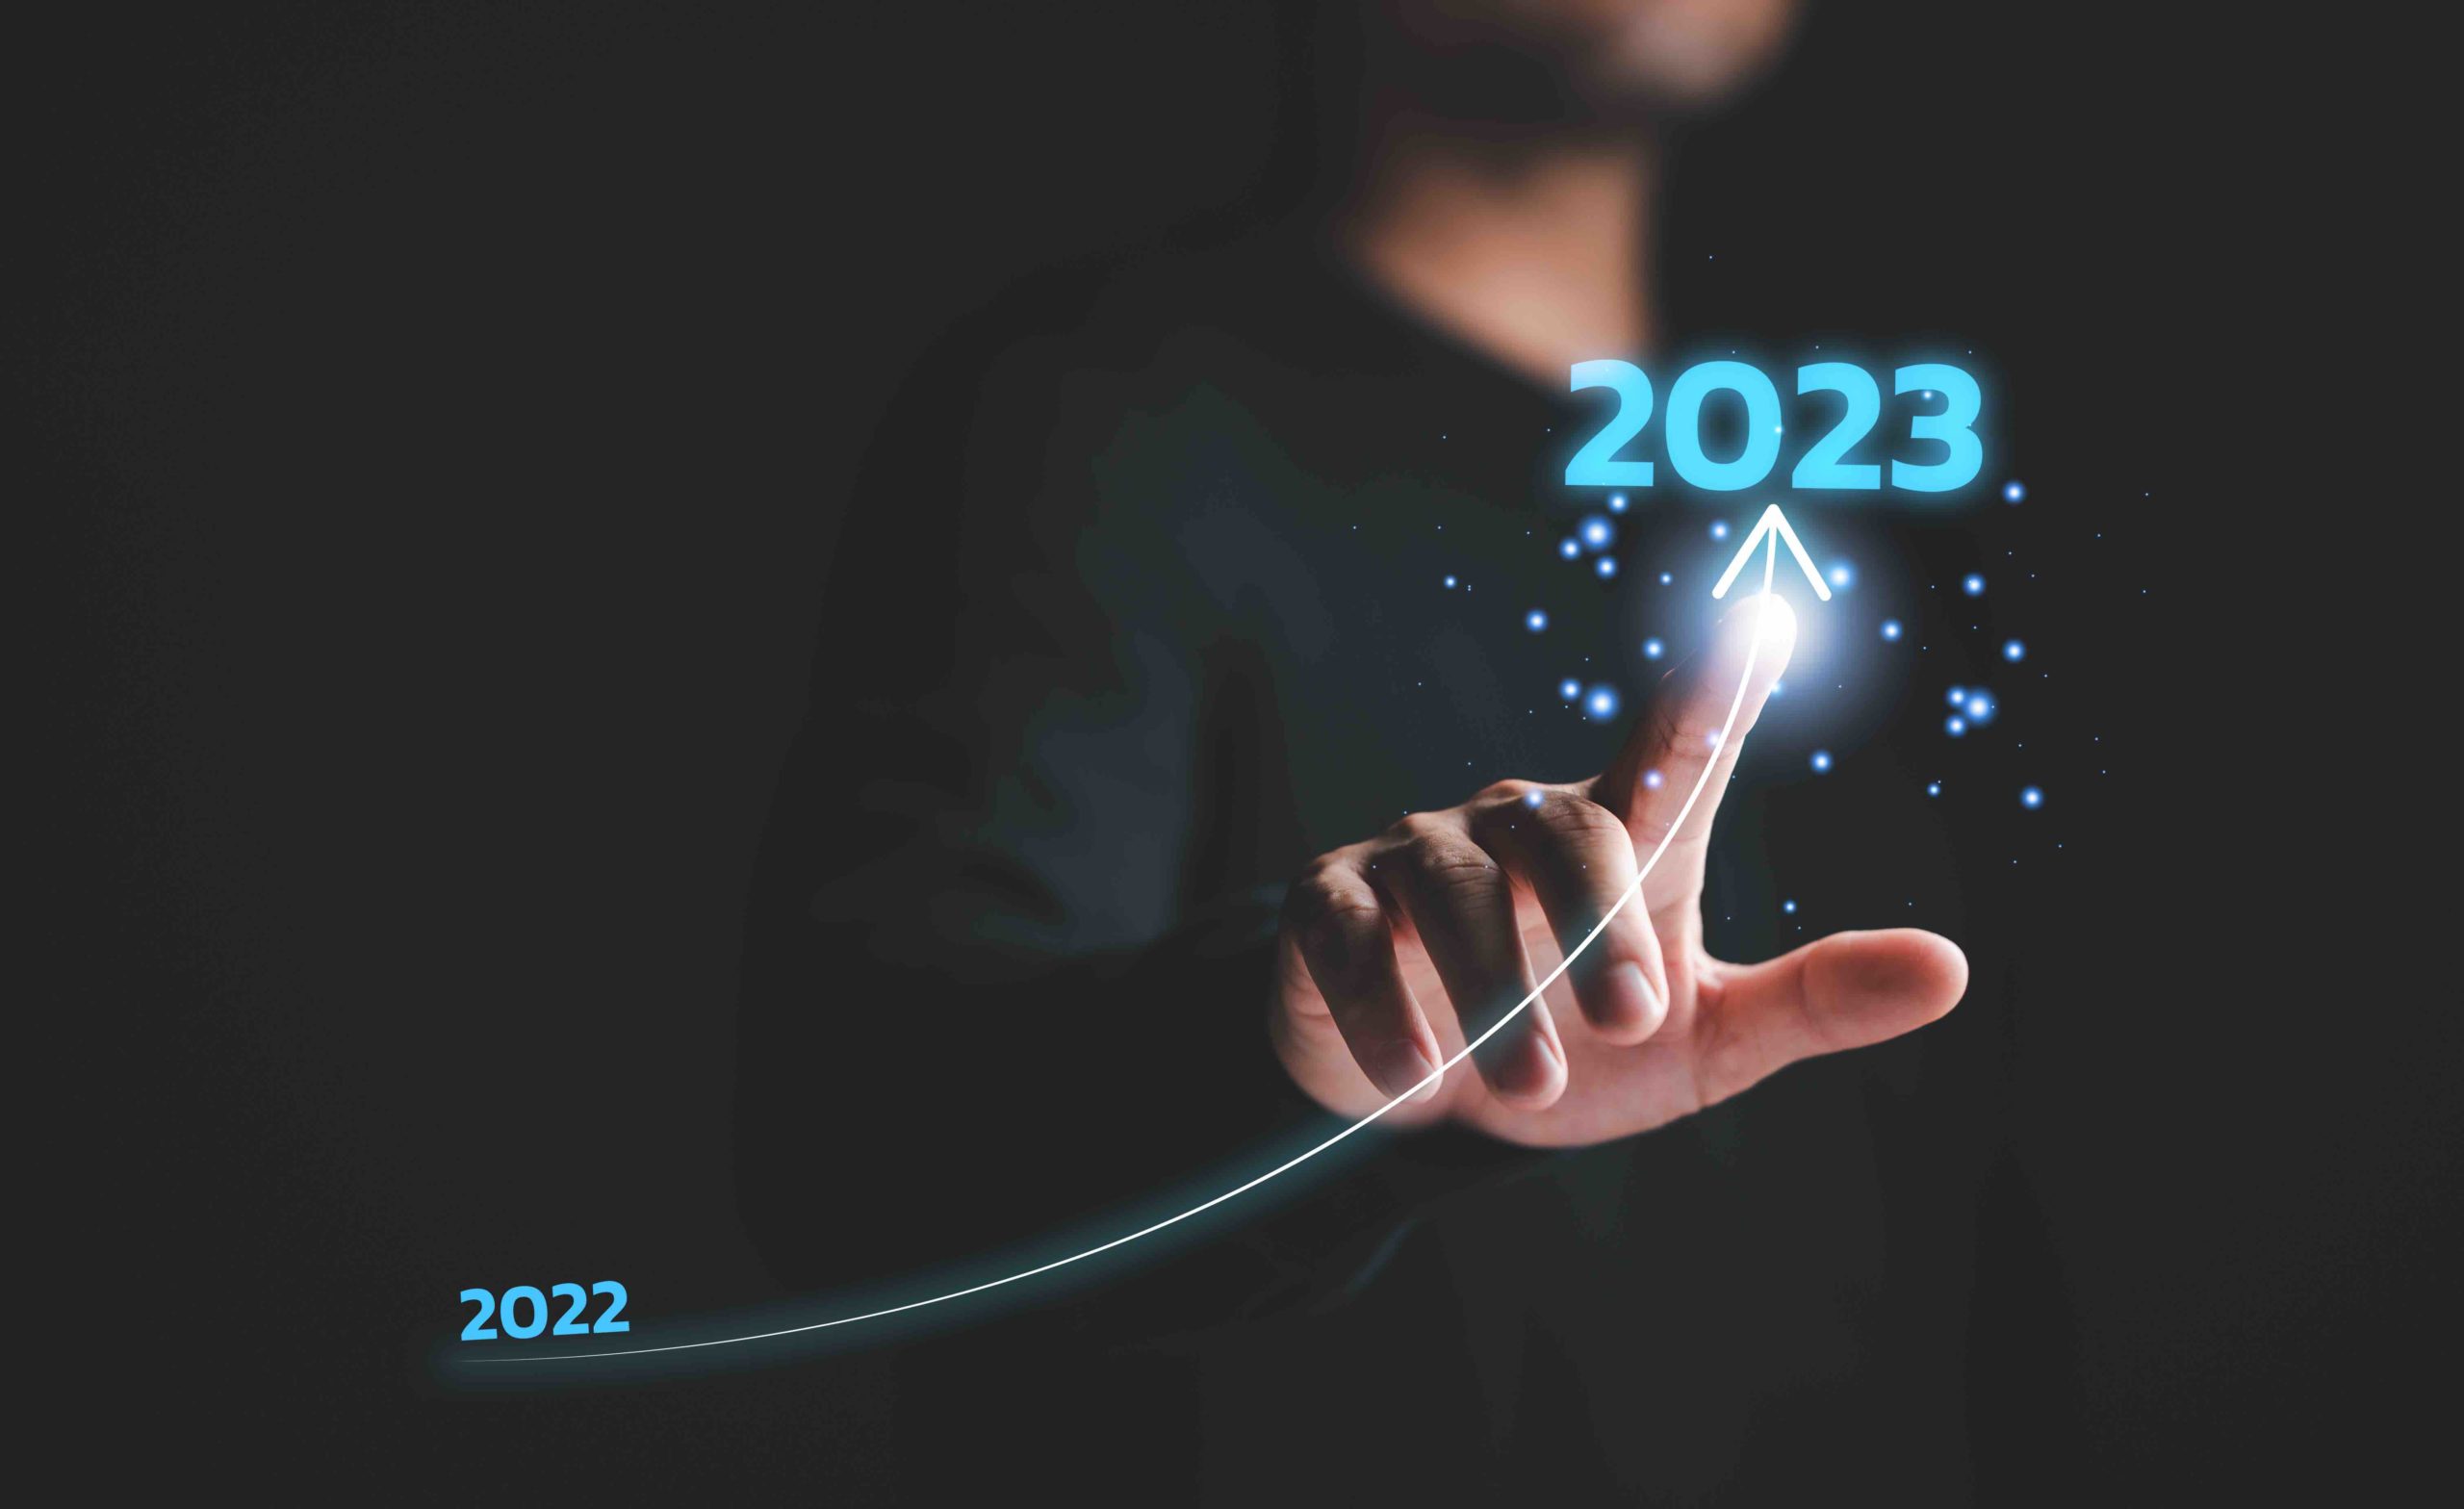 Cybersecurity: What to Expect in 2023